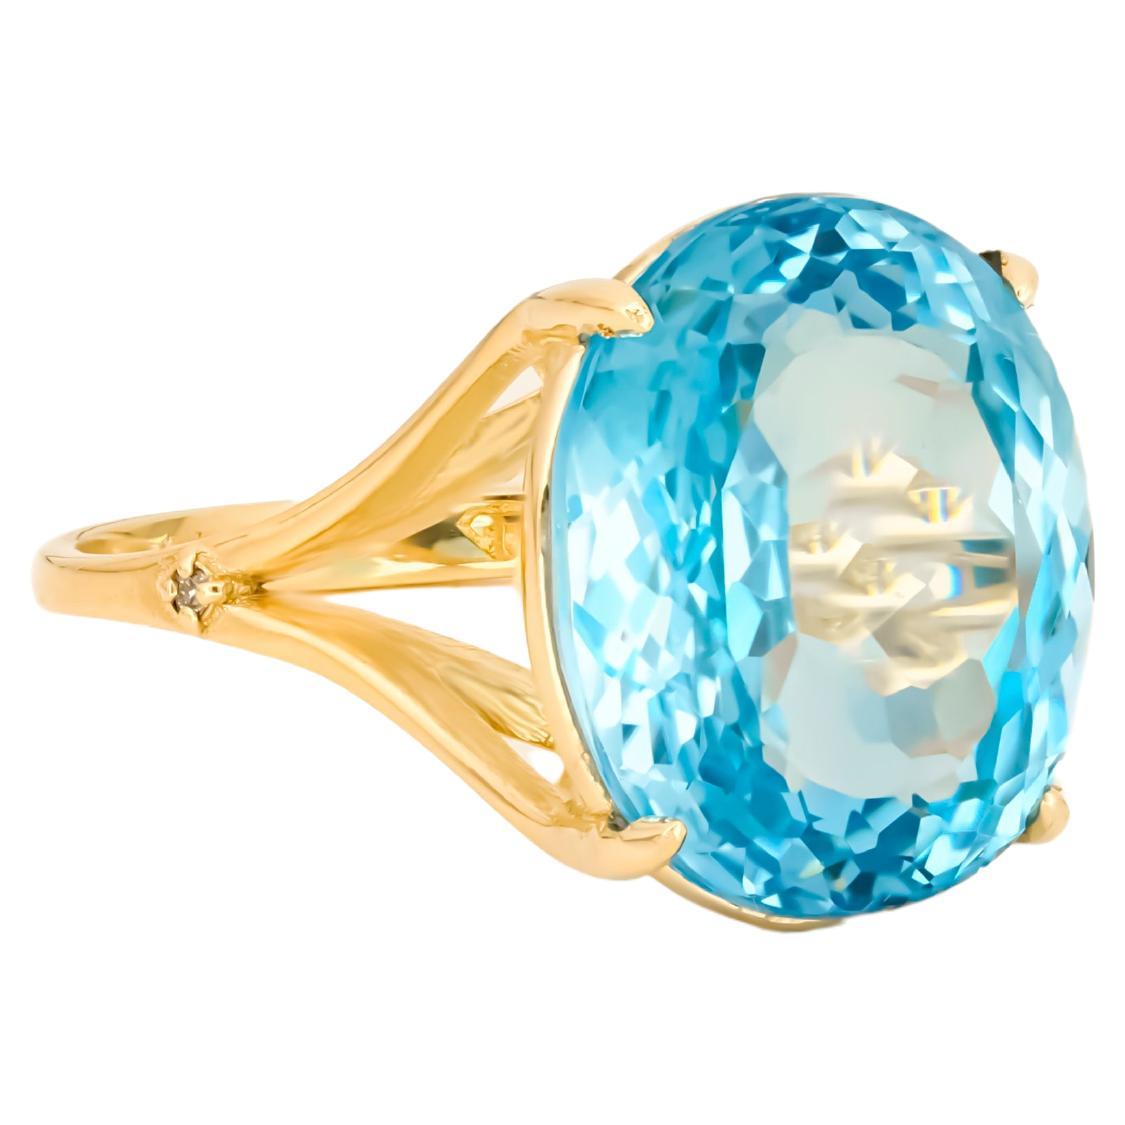  14k Gold Ring with Topaz